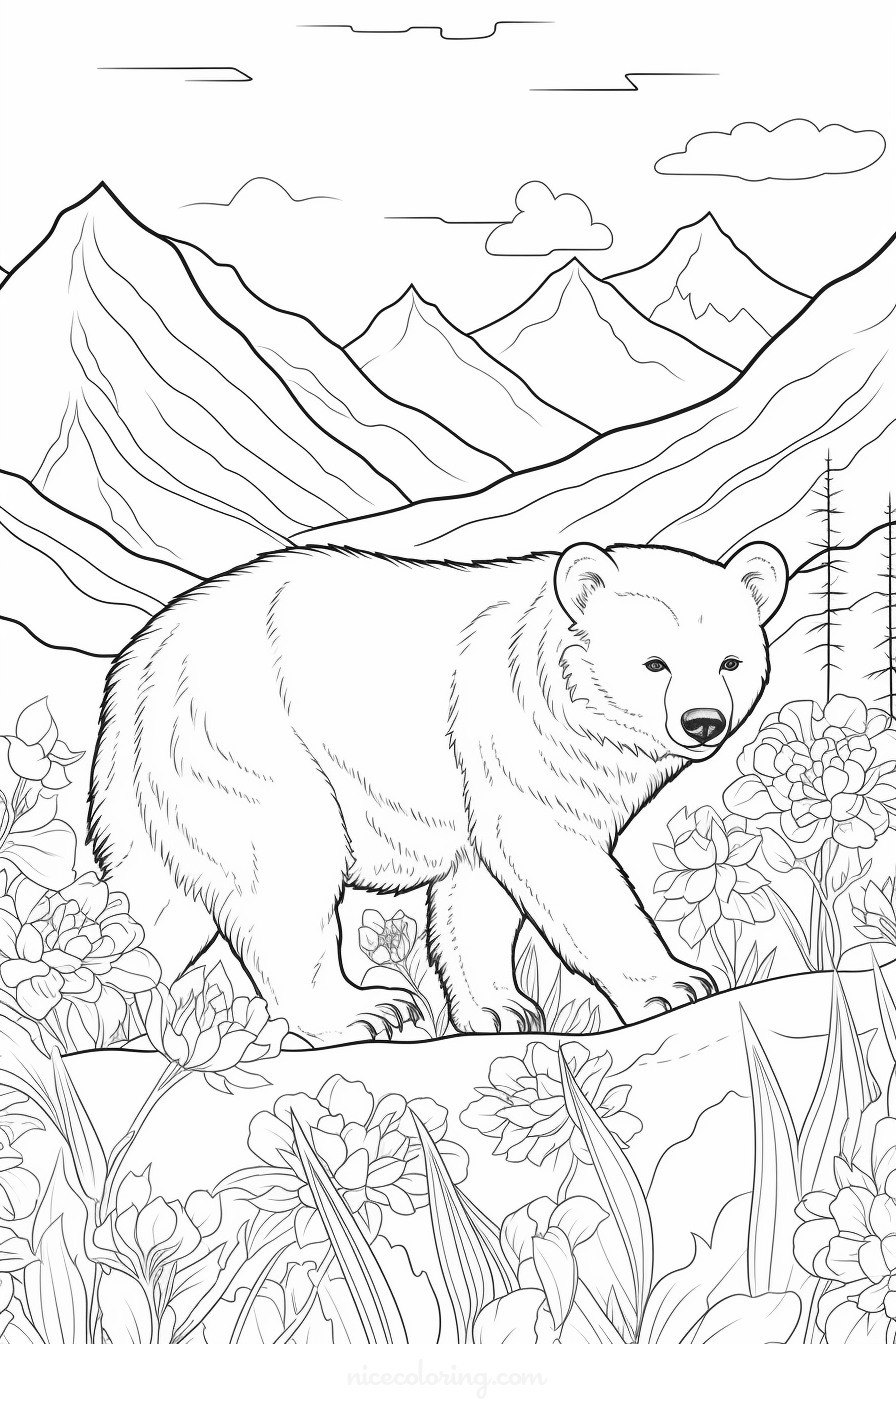 Bear playing with forest animals coloring page